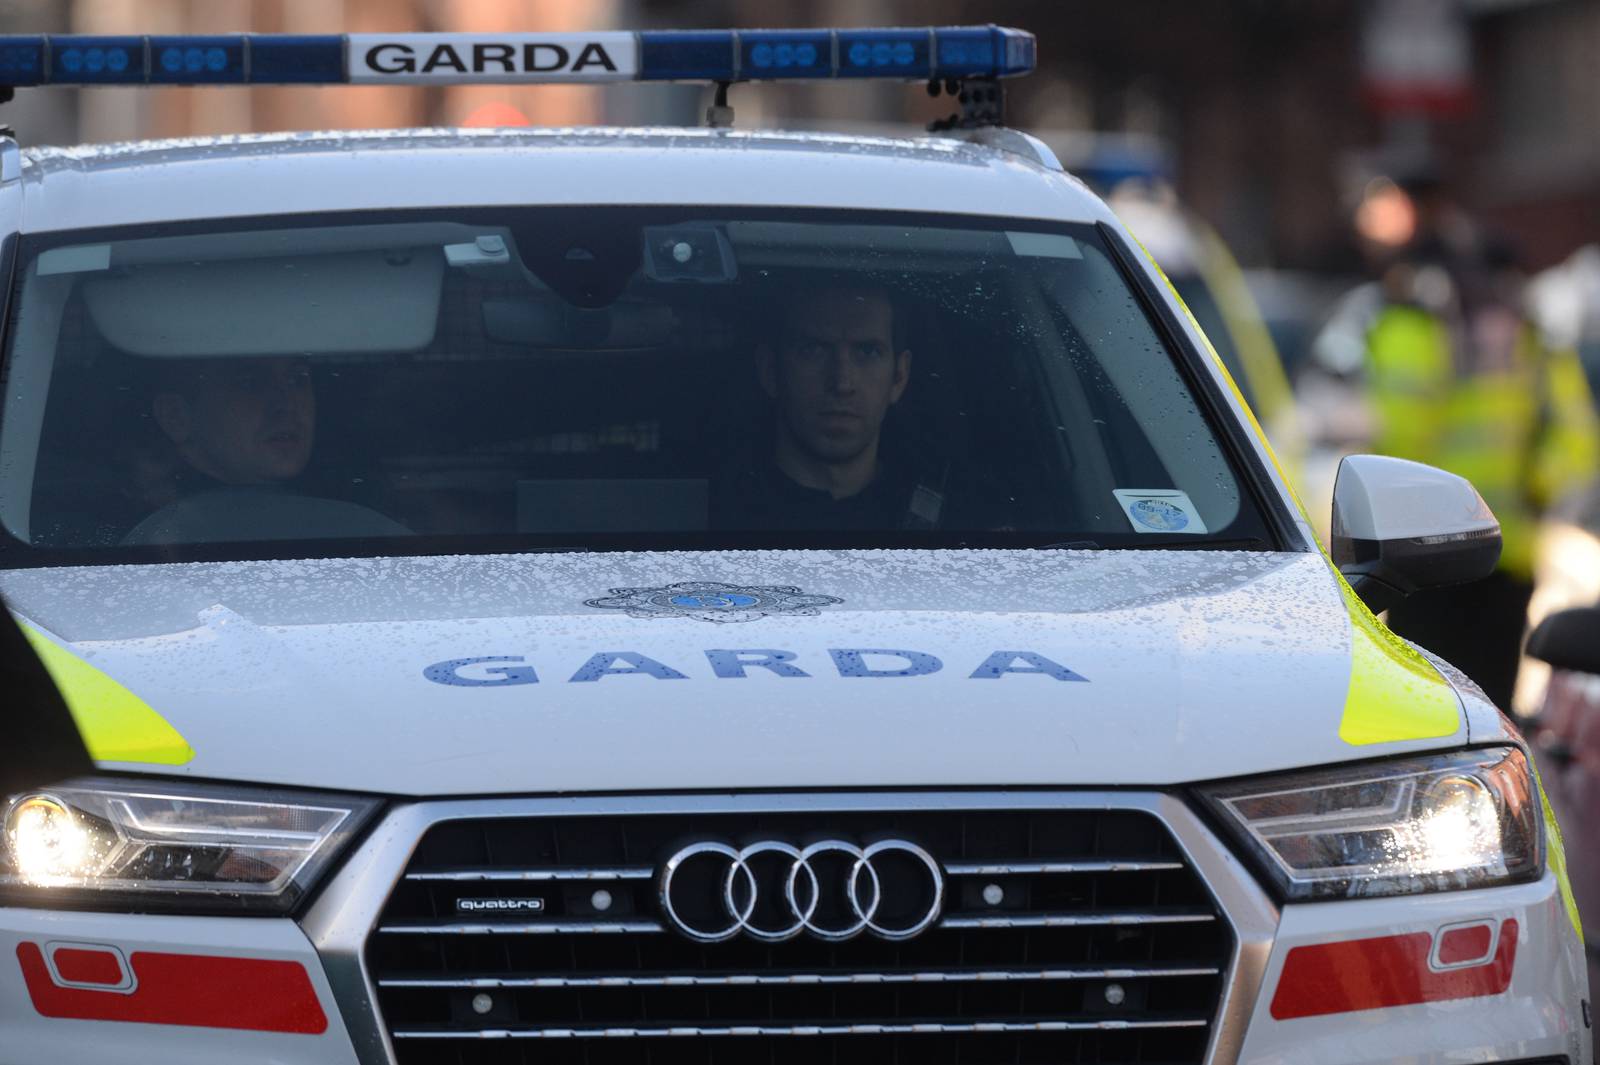 31/01/2018 - NEWS - The Garda Security operation surrounding the funeral of  Derek Coakley Hutch, (Del Boy)  from his home on  Buckingham Street  to Our Lady of Lourdes Church, Sean McDermott St. for funeral mass.
Photograph: Alan Betson / The Irish Times